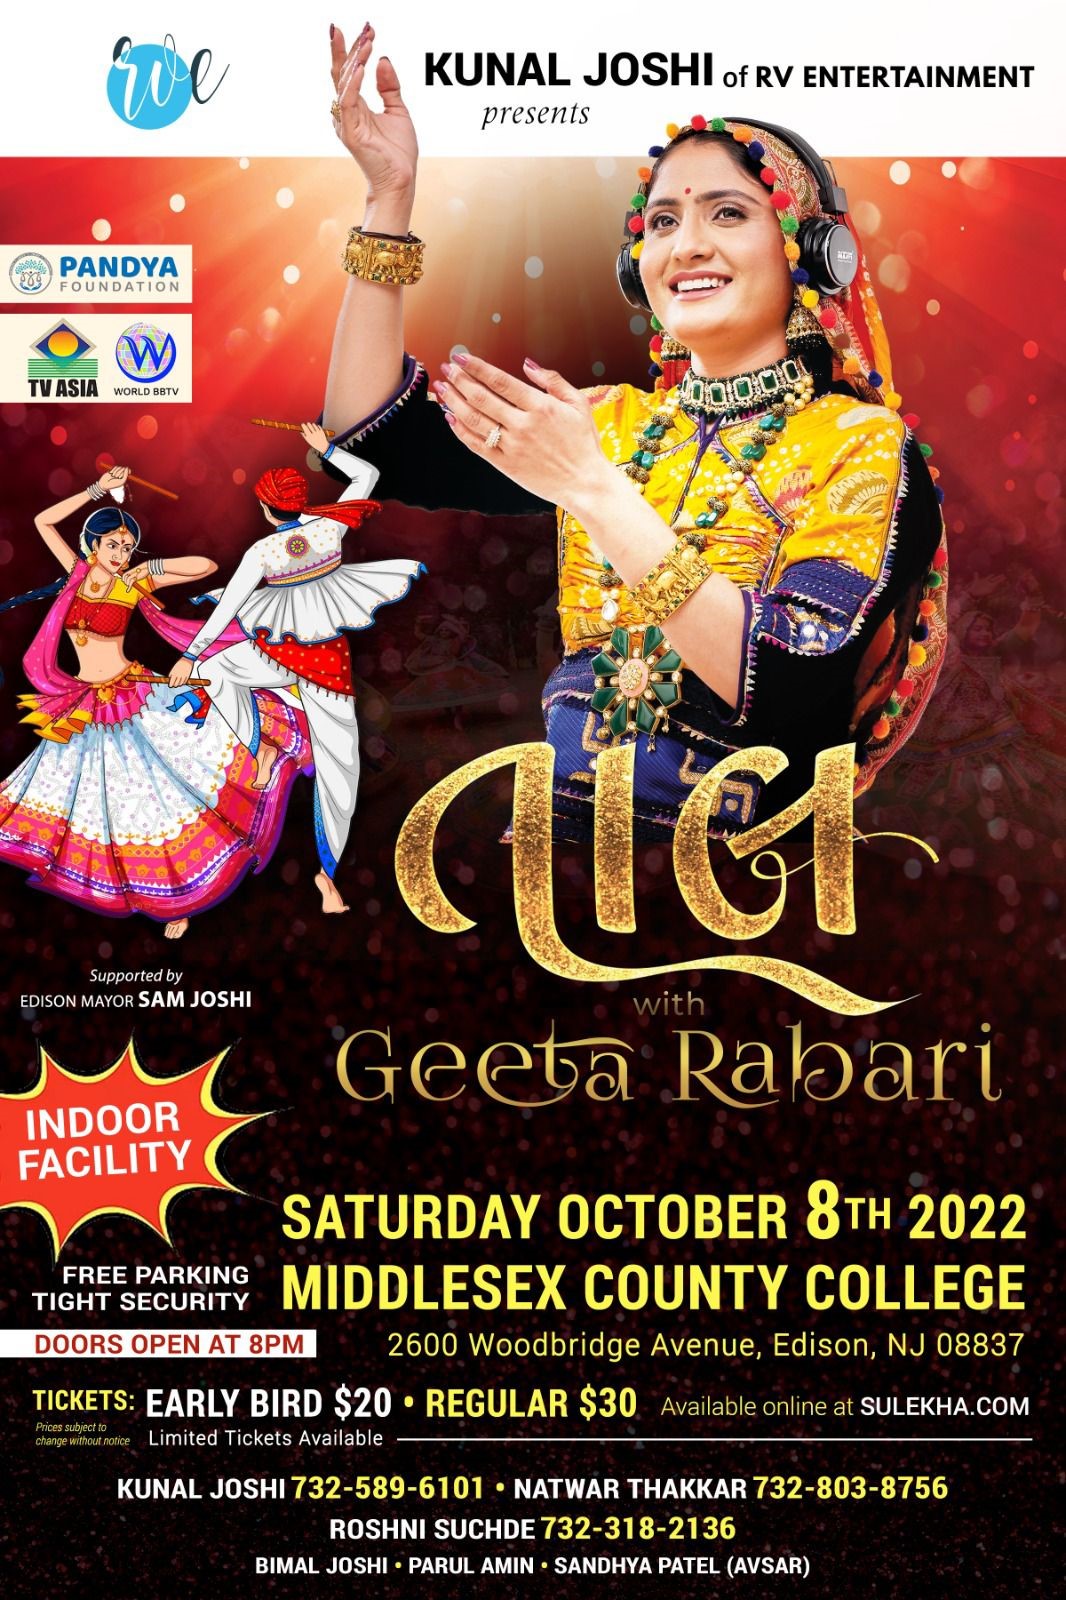 Geeta Rabari Garba at Middlesex County College Saturday October 8th, 2022 Taal with Geeta Rabari on Oct 08, 20:00@Middlesex county college Edison NJ - Buy tickets and Get information on Desi Events desievents.org